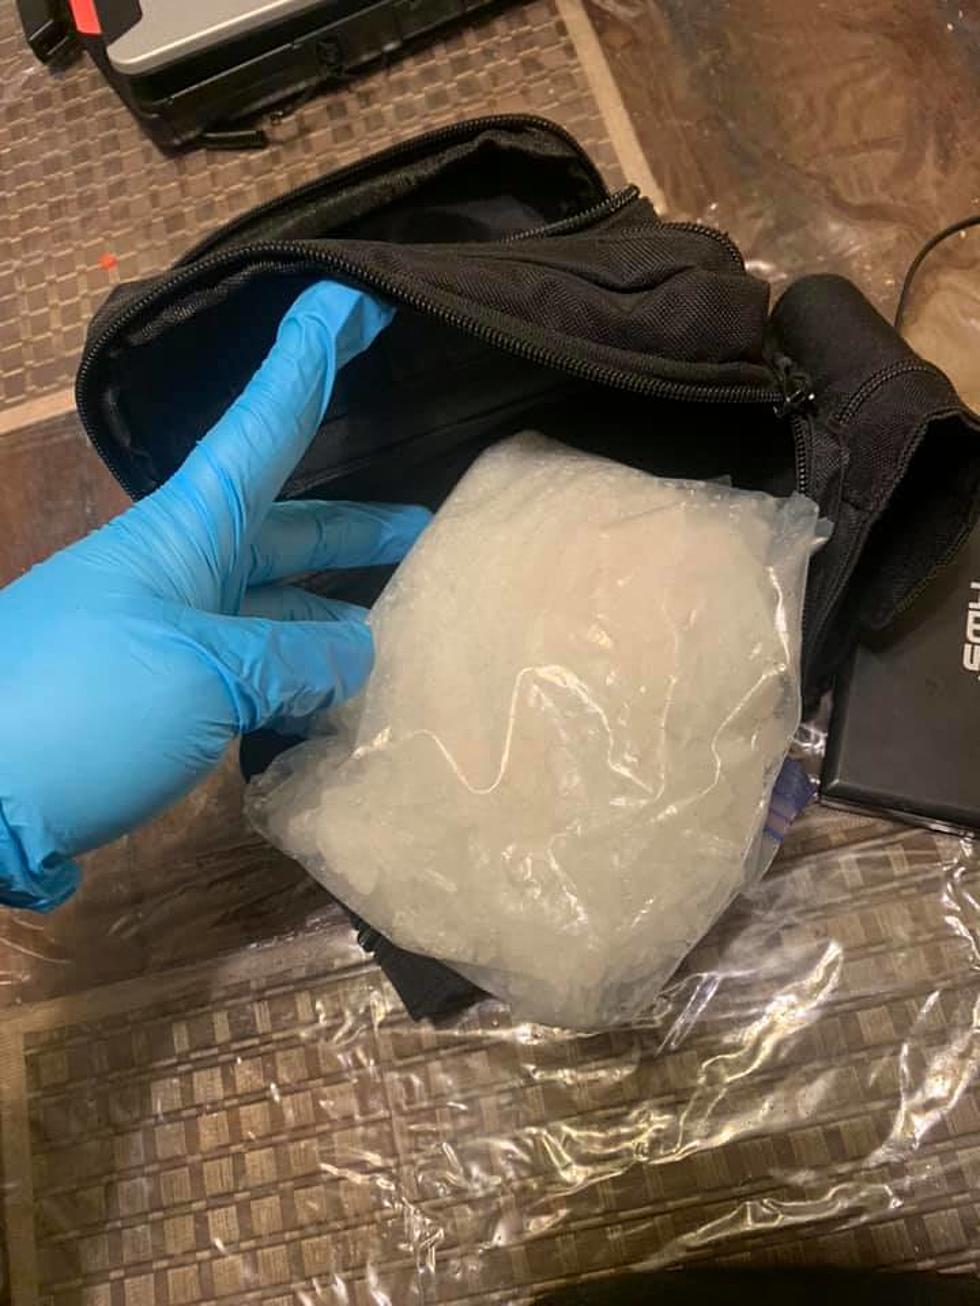 Adams County Search Turns Up Pound of Meth &#038; Stolen Goods